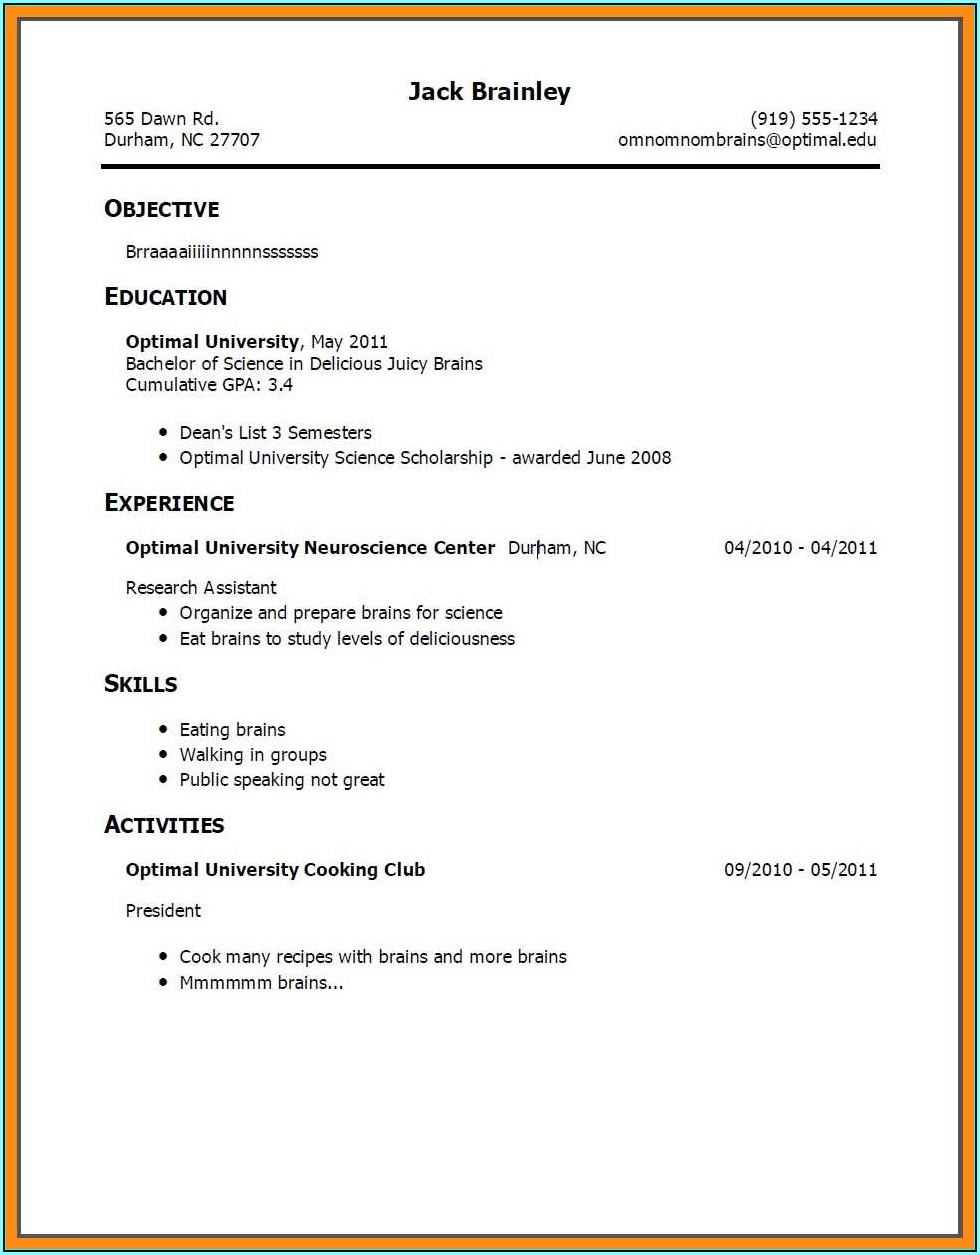 How To Build A Resume For Someone With No Work Experience